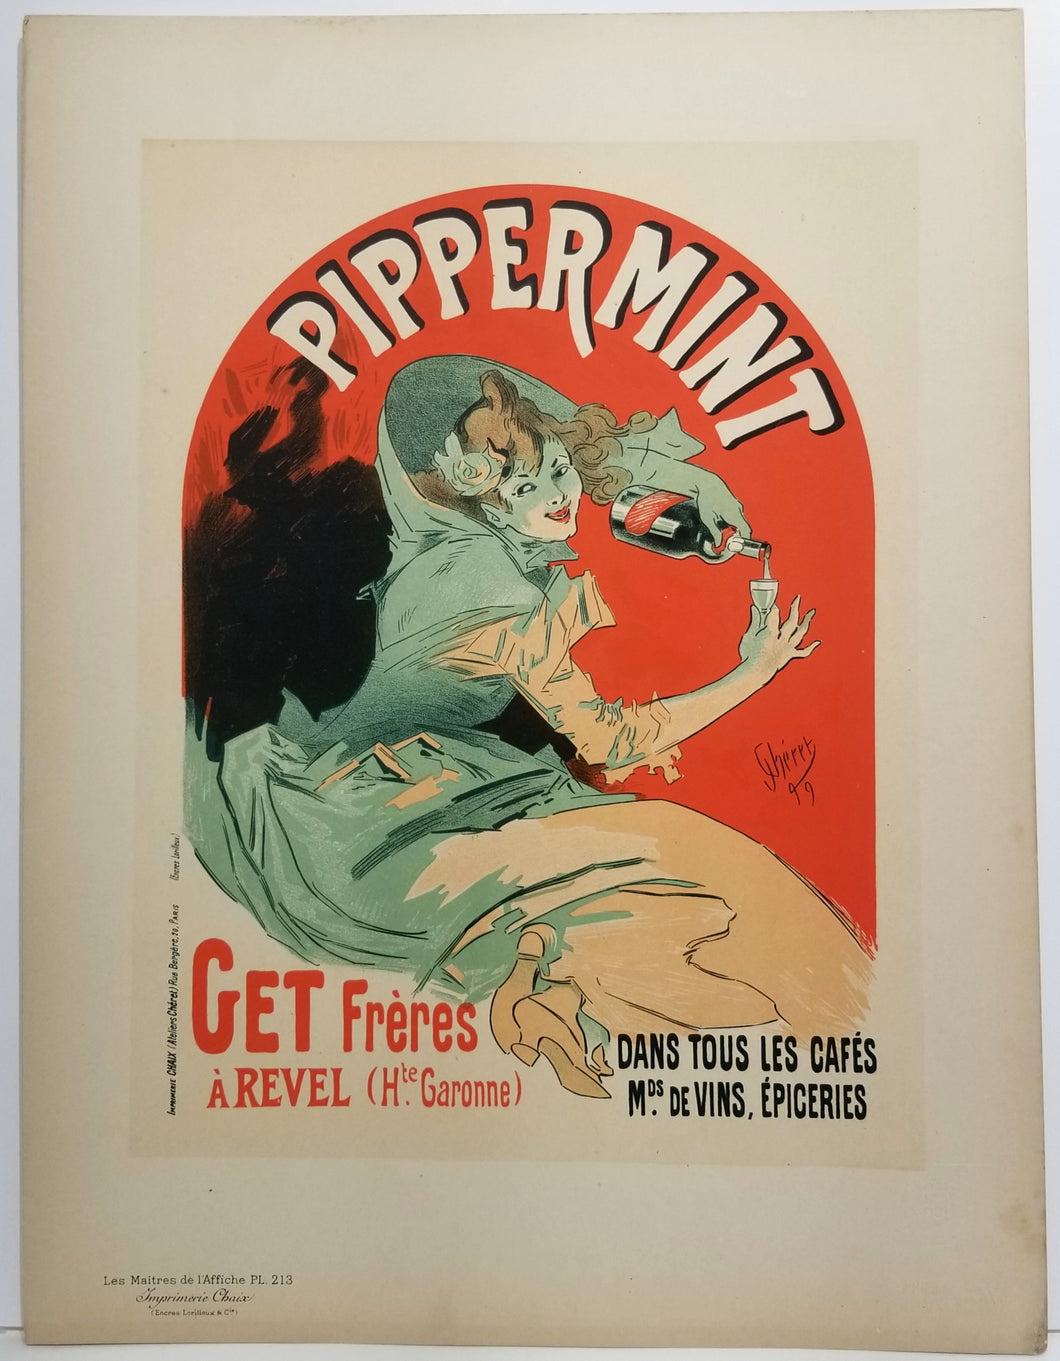 Pippermint. 1900.